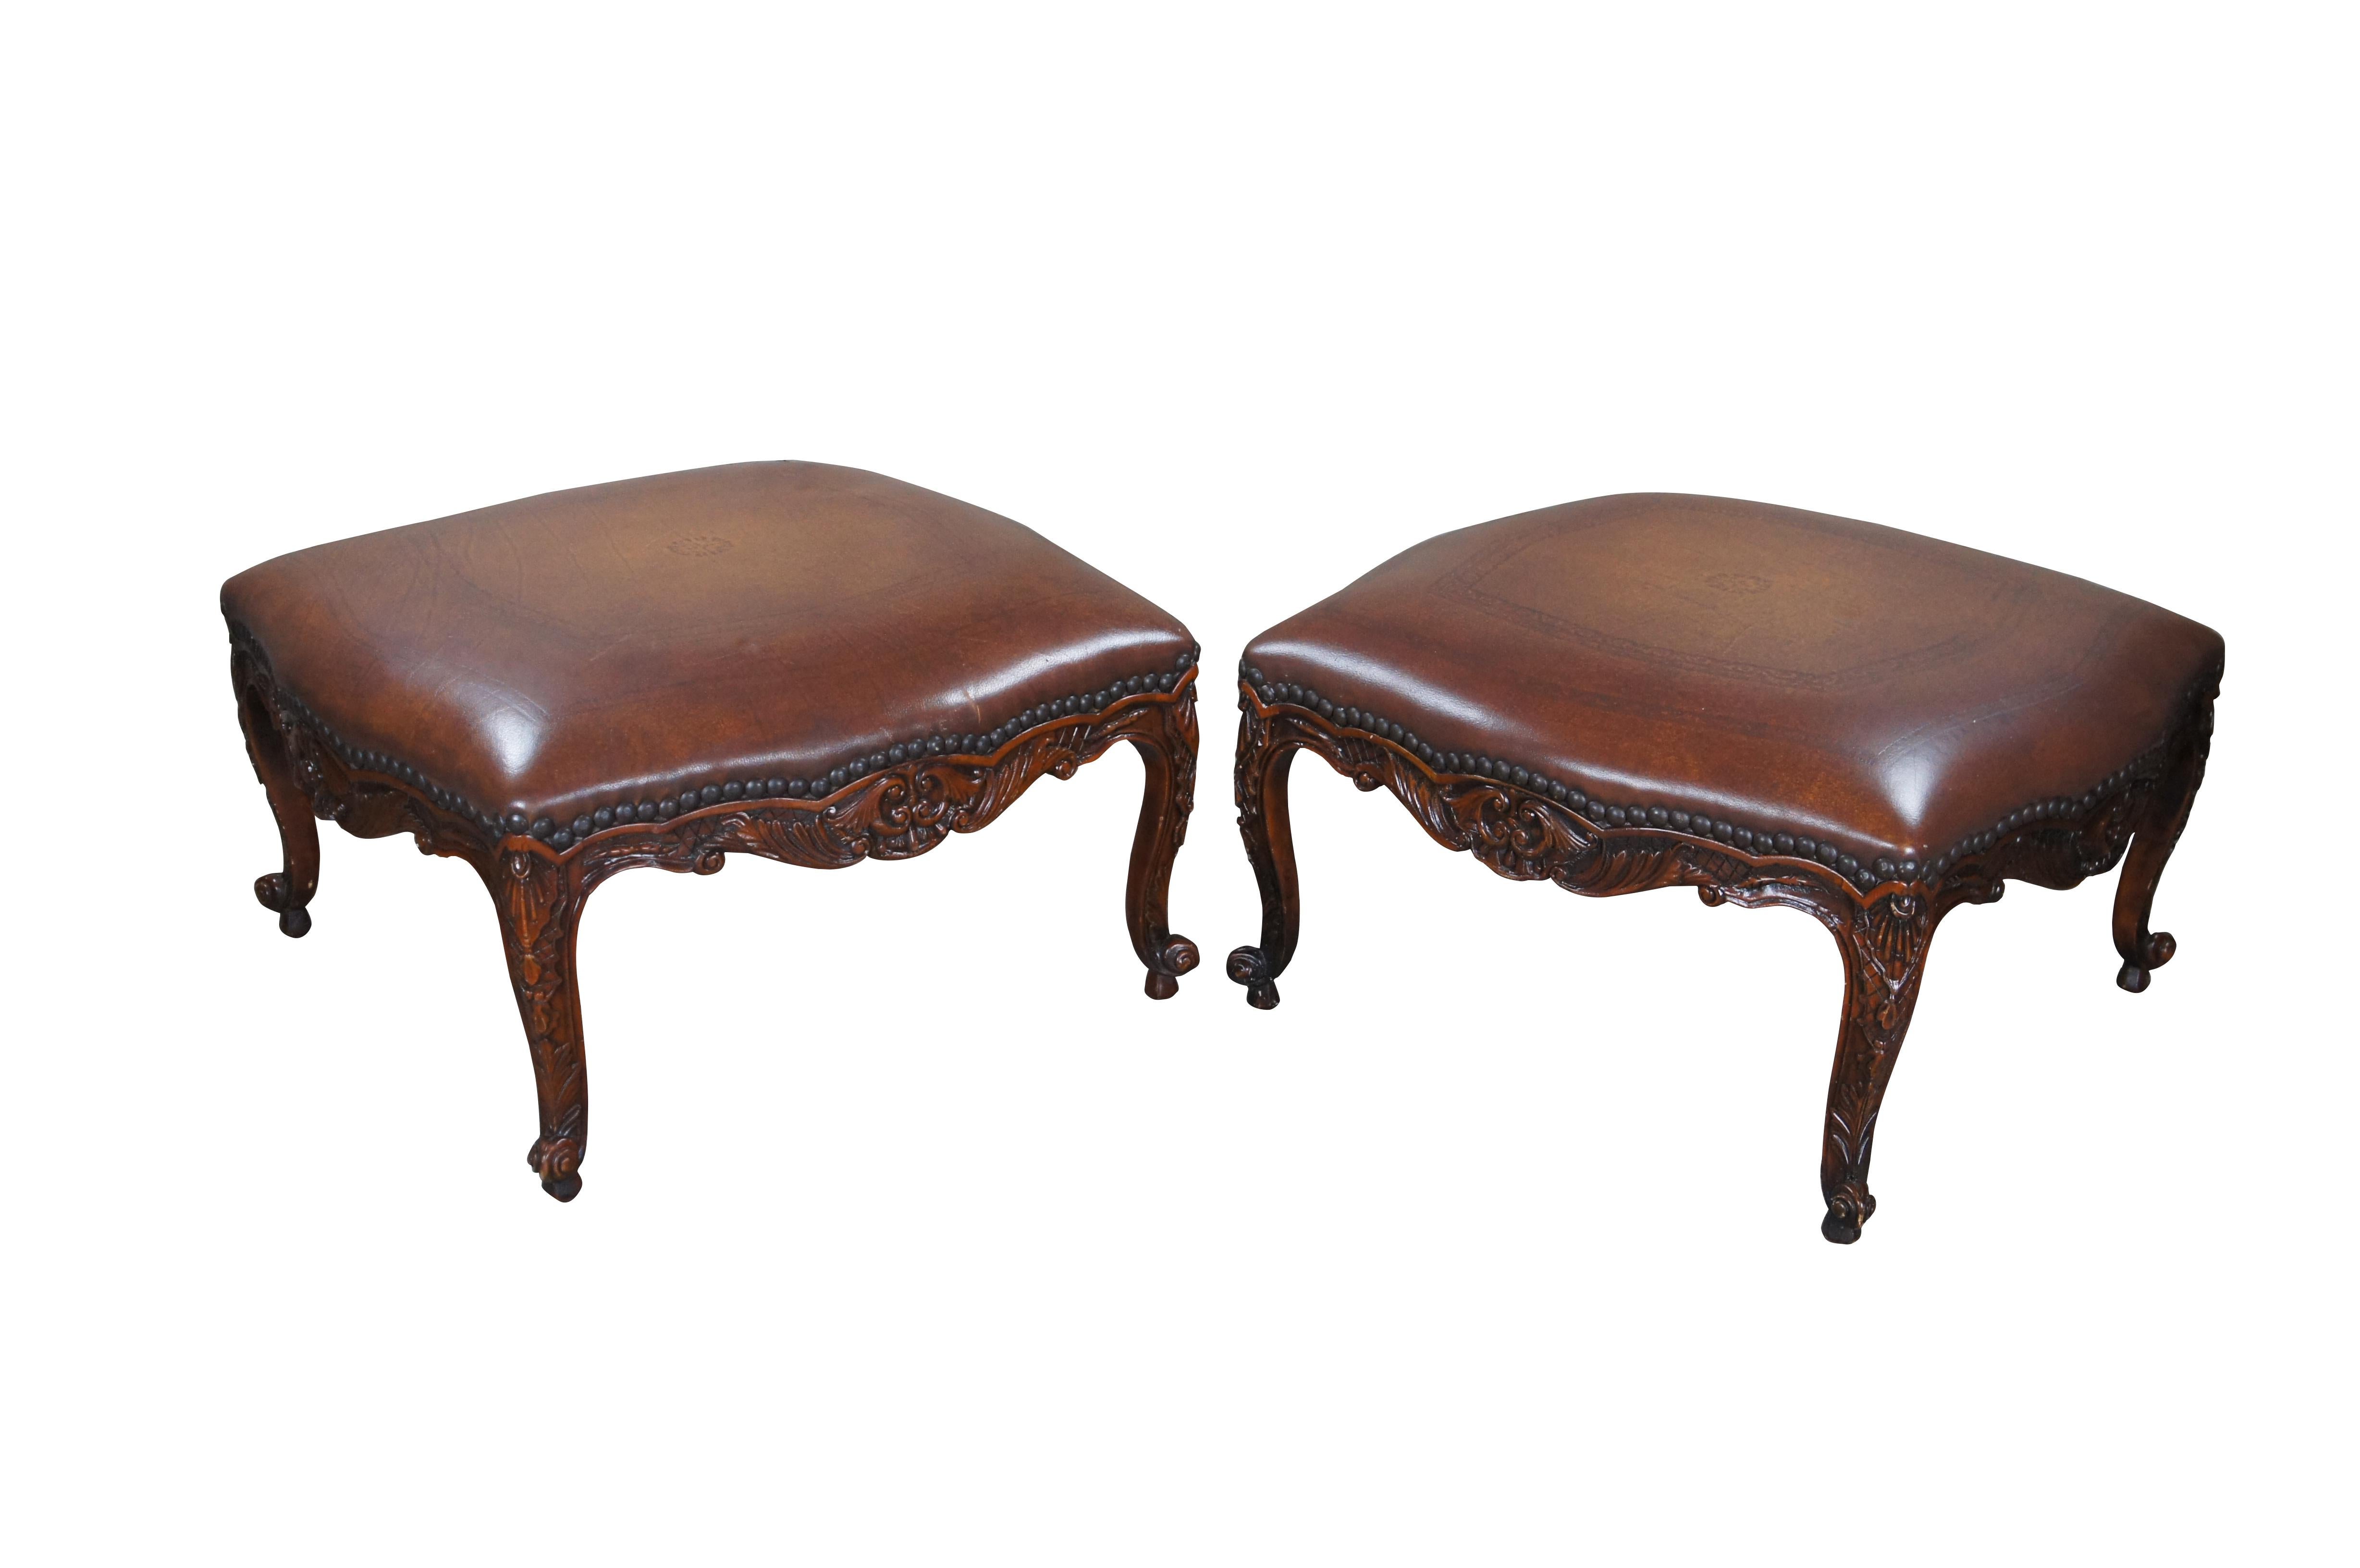 Pair of Late 20th century Ottomans / Foot stools by Theodore Alexander. French Country / Baroque inspiration with carved mahogany frames. Upholstered in brown tooled leather with nailhead trim. Includes serpentine aprons with carved lattice and